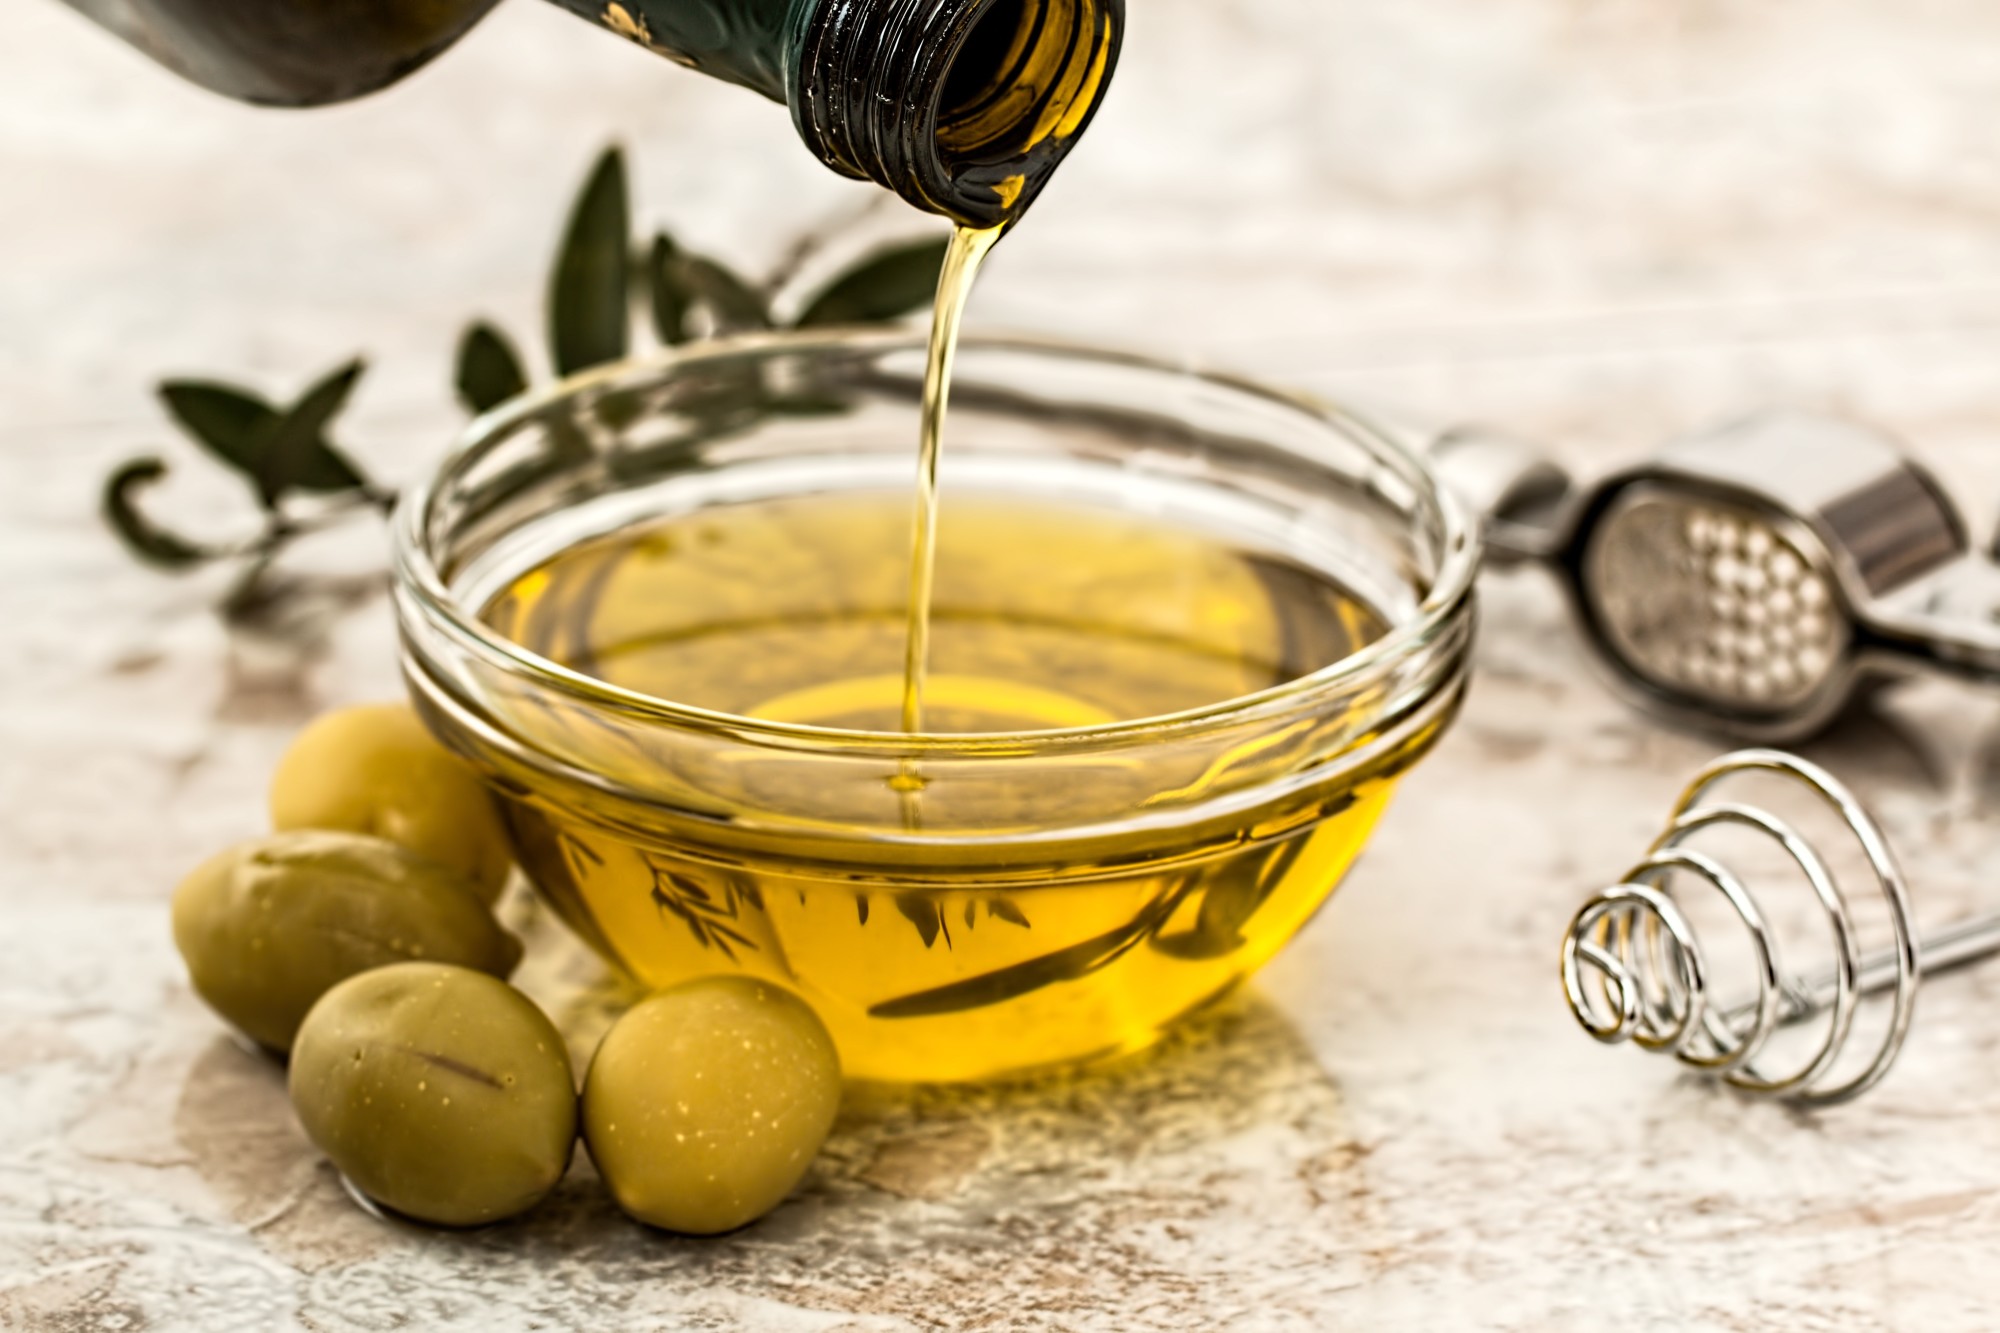 There are several reasons why you need olive oil in your kitchen. Keep reading to learn more about the benefits of olive oil.